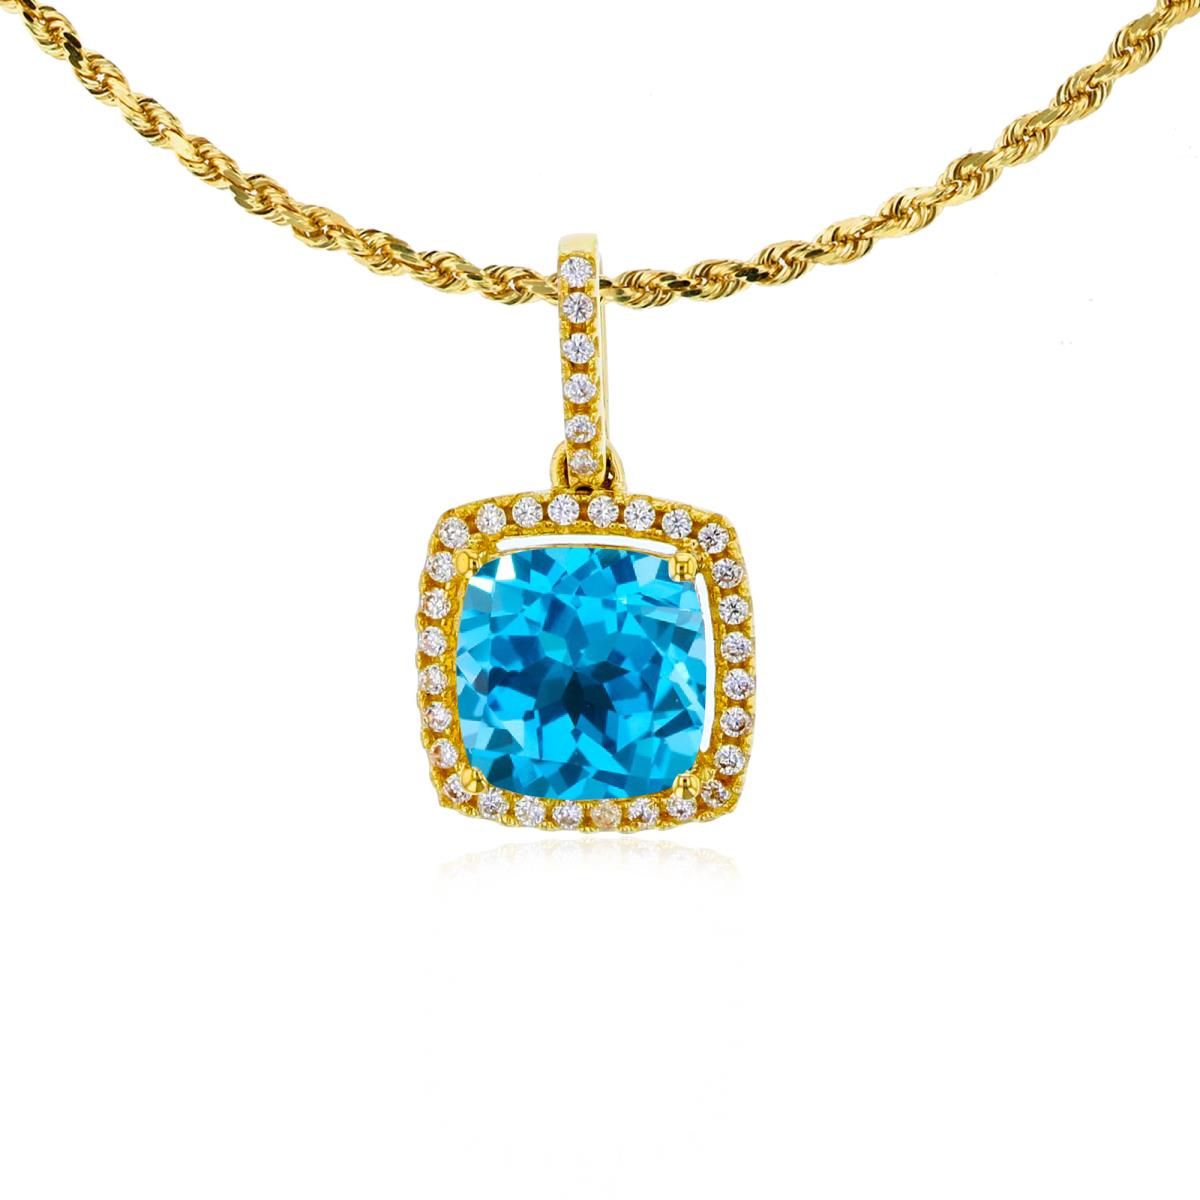 10K Yellow Gold 7mm Cushion Swiss Blue Topaz & 0.14 CTTW Rnd Diamond Halo 18" Rope Chain Necklace